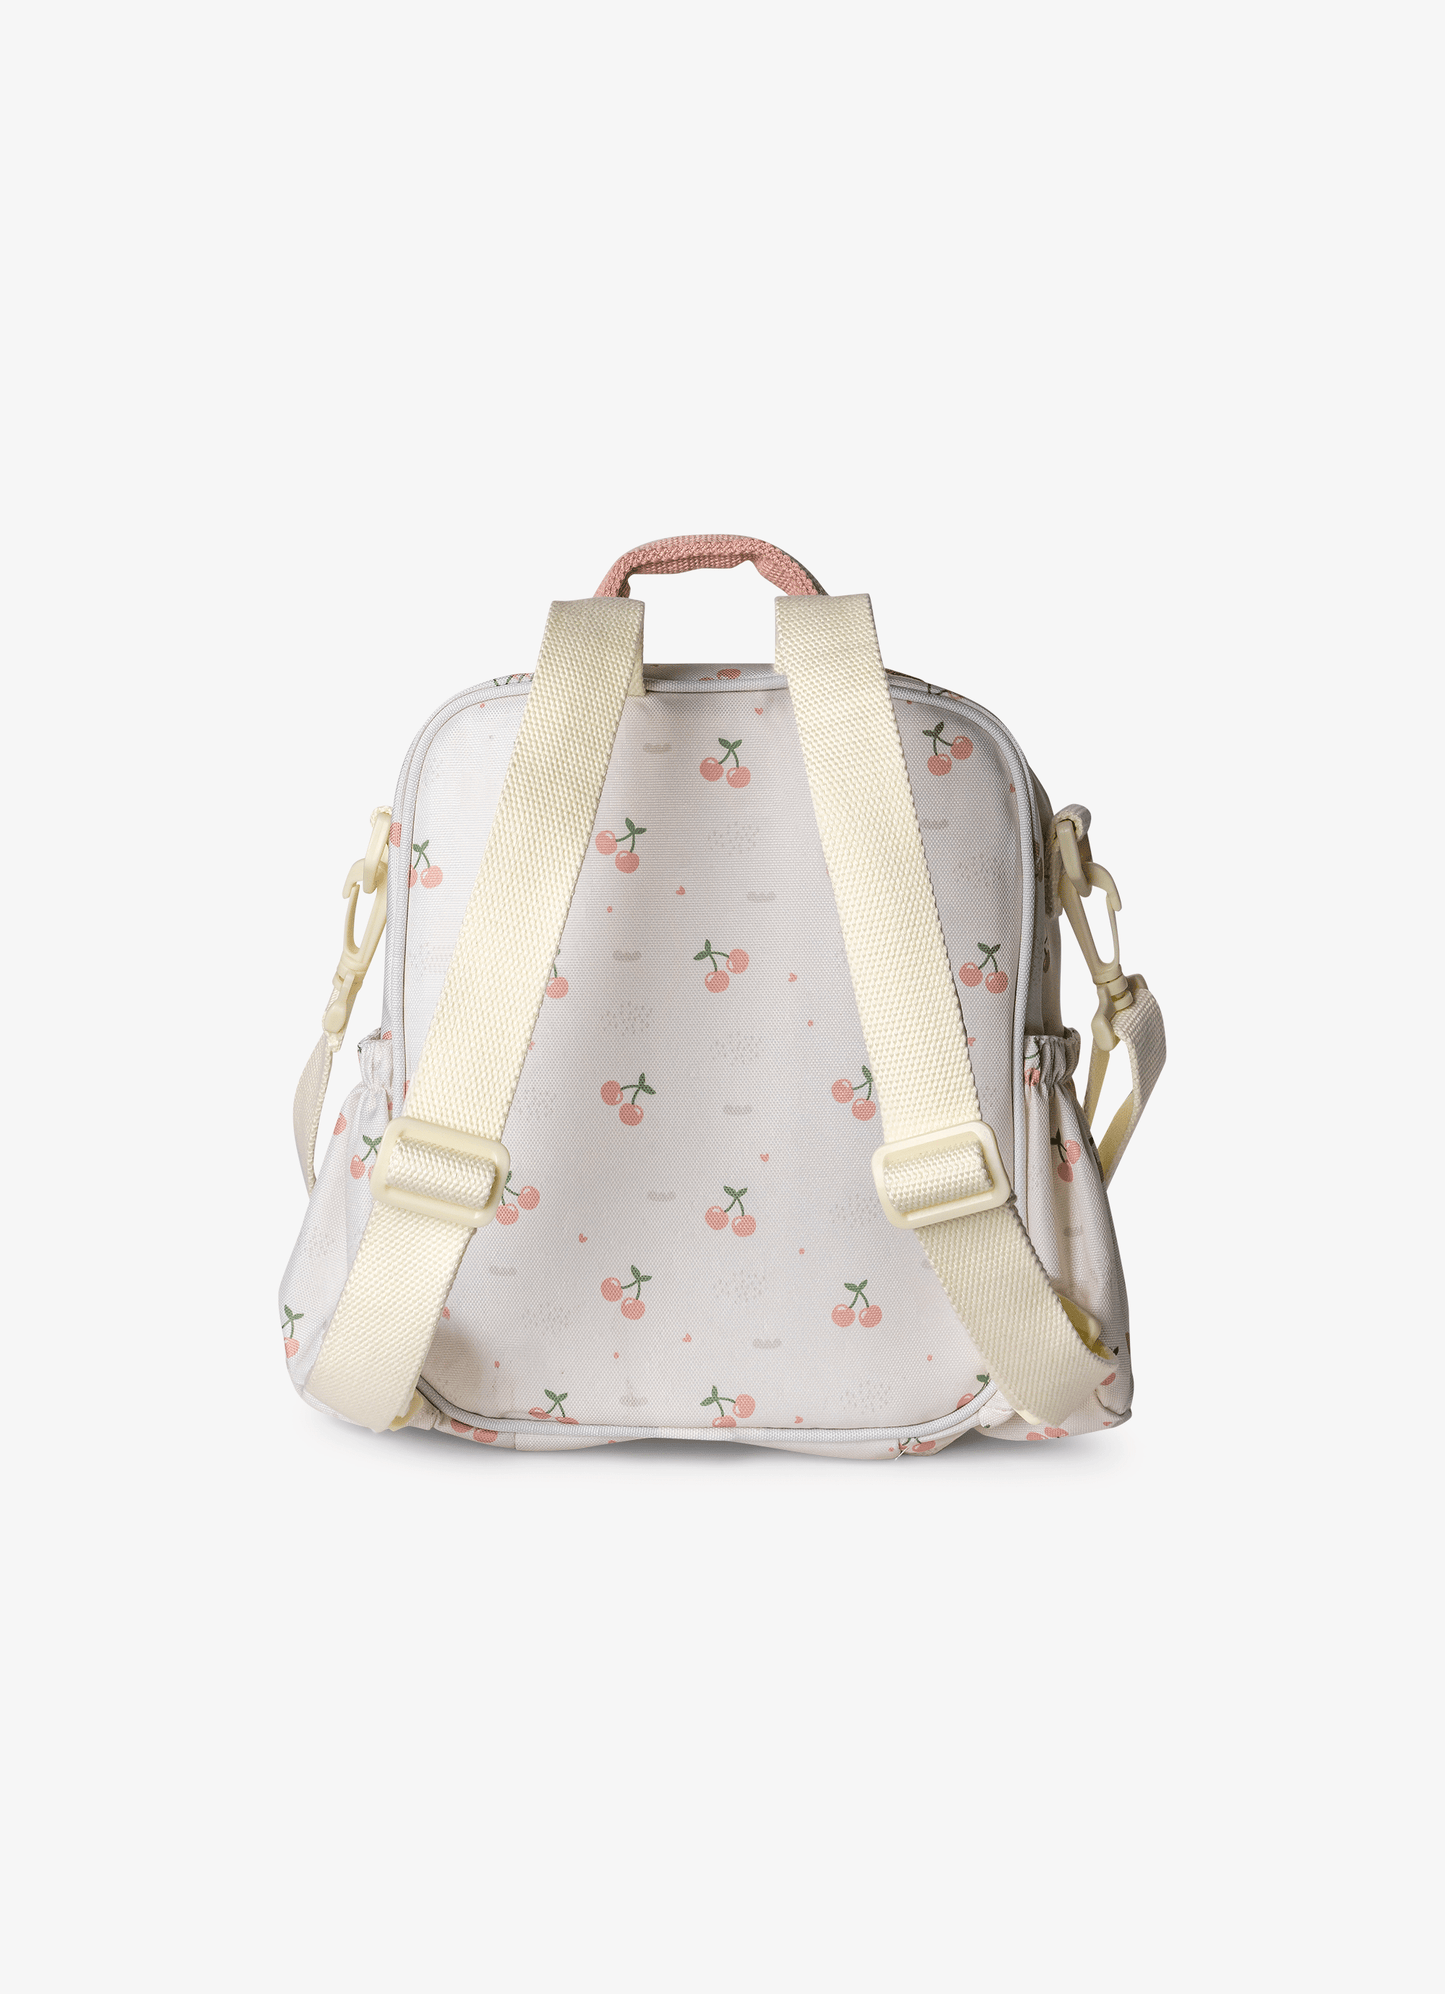 Insulated Lunch Bag Backpack - Cherry